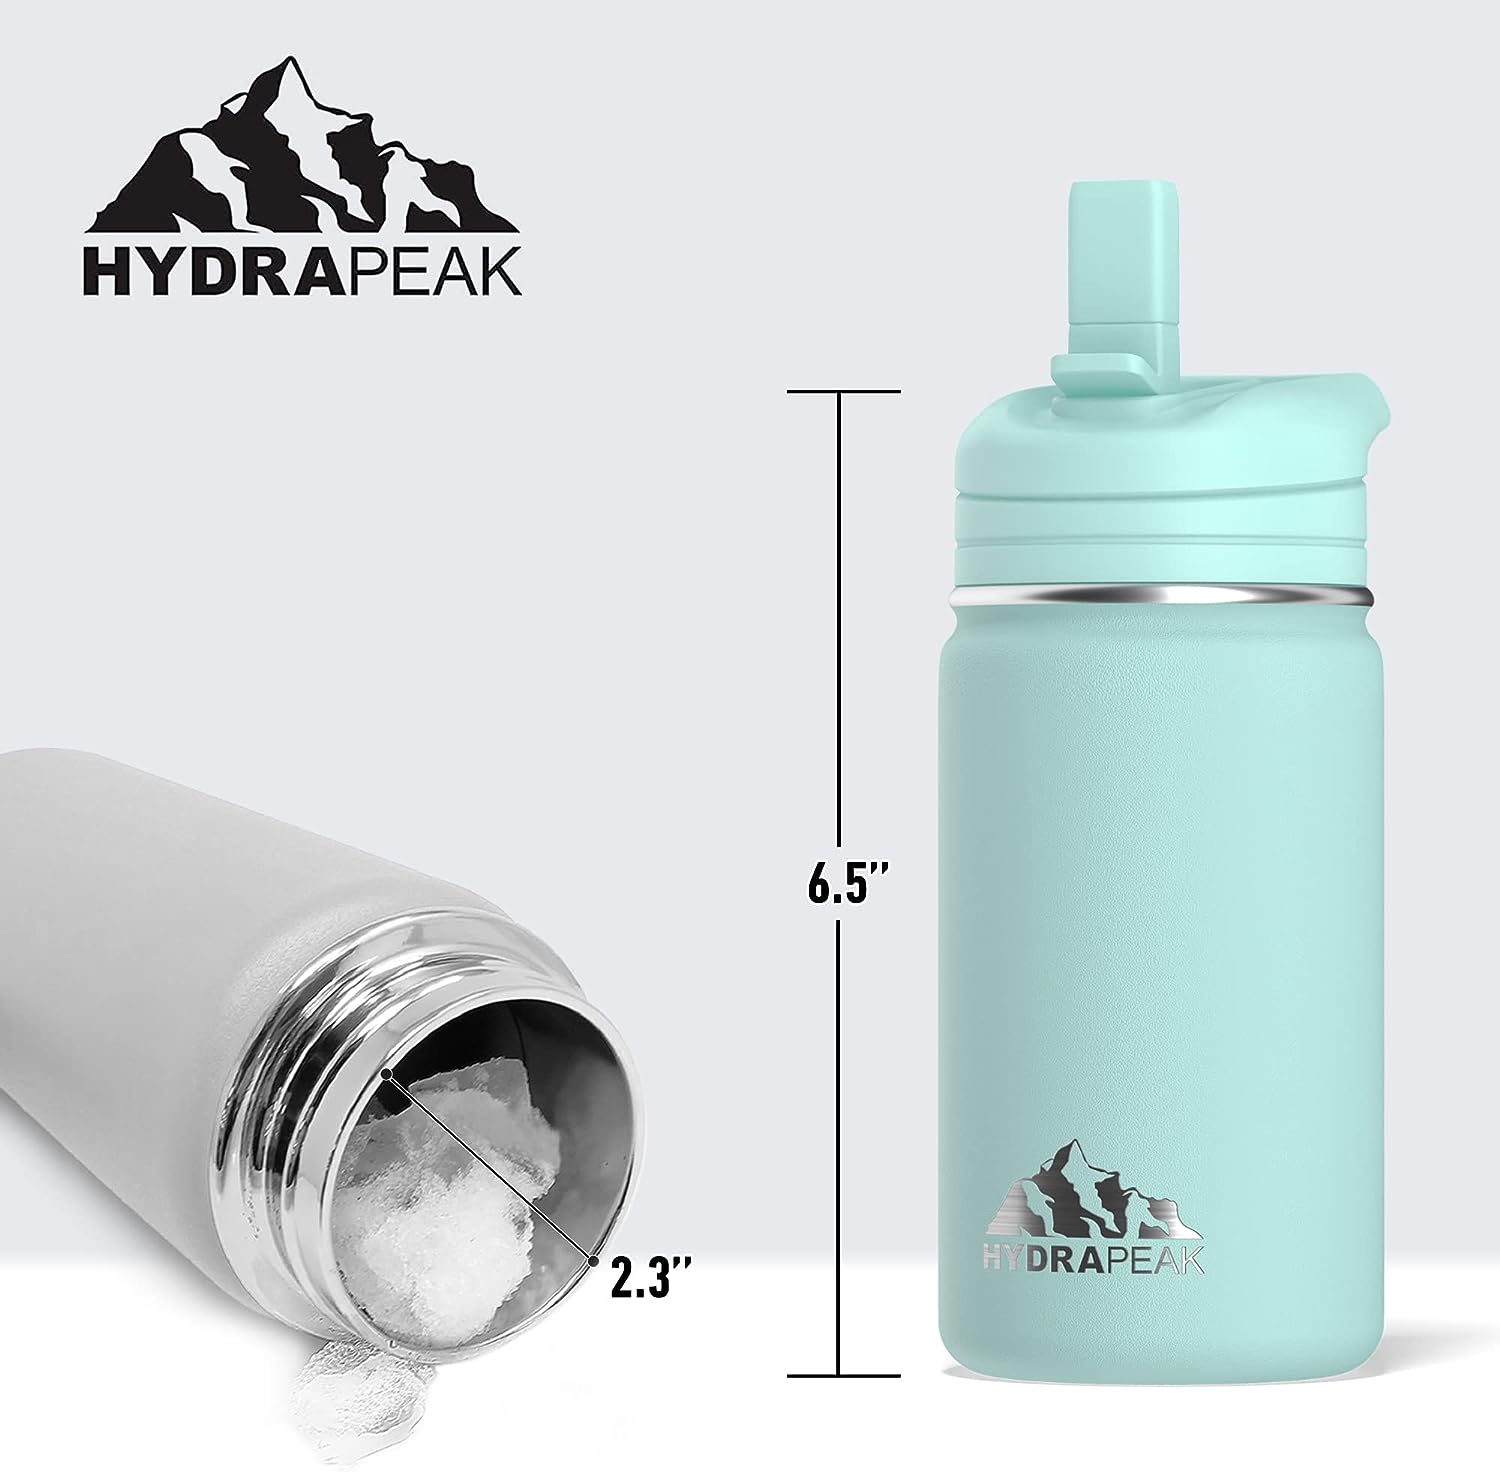 Hydrapeak Stainless Steel Bottle with Straw Lid & Silicone Boot 32oz in Navy